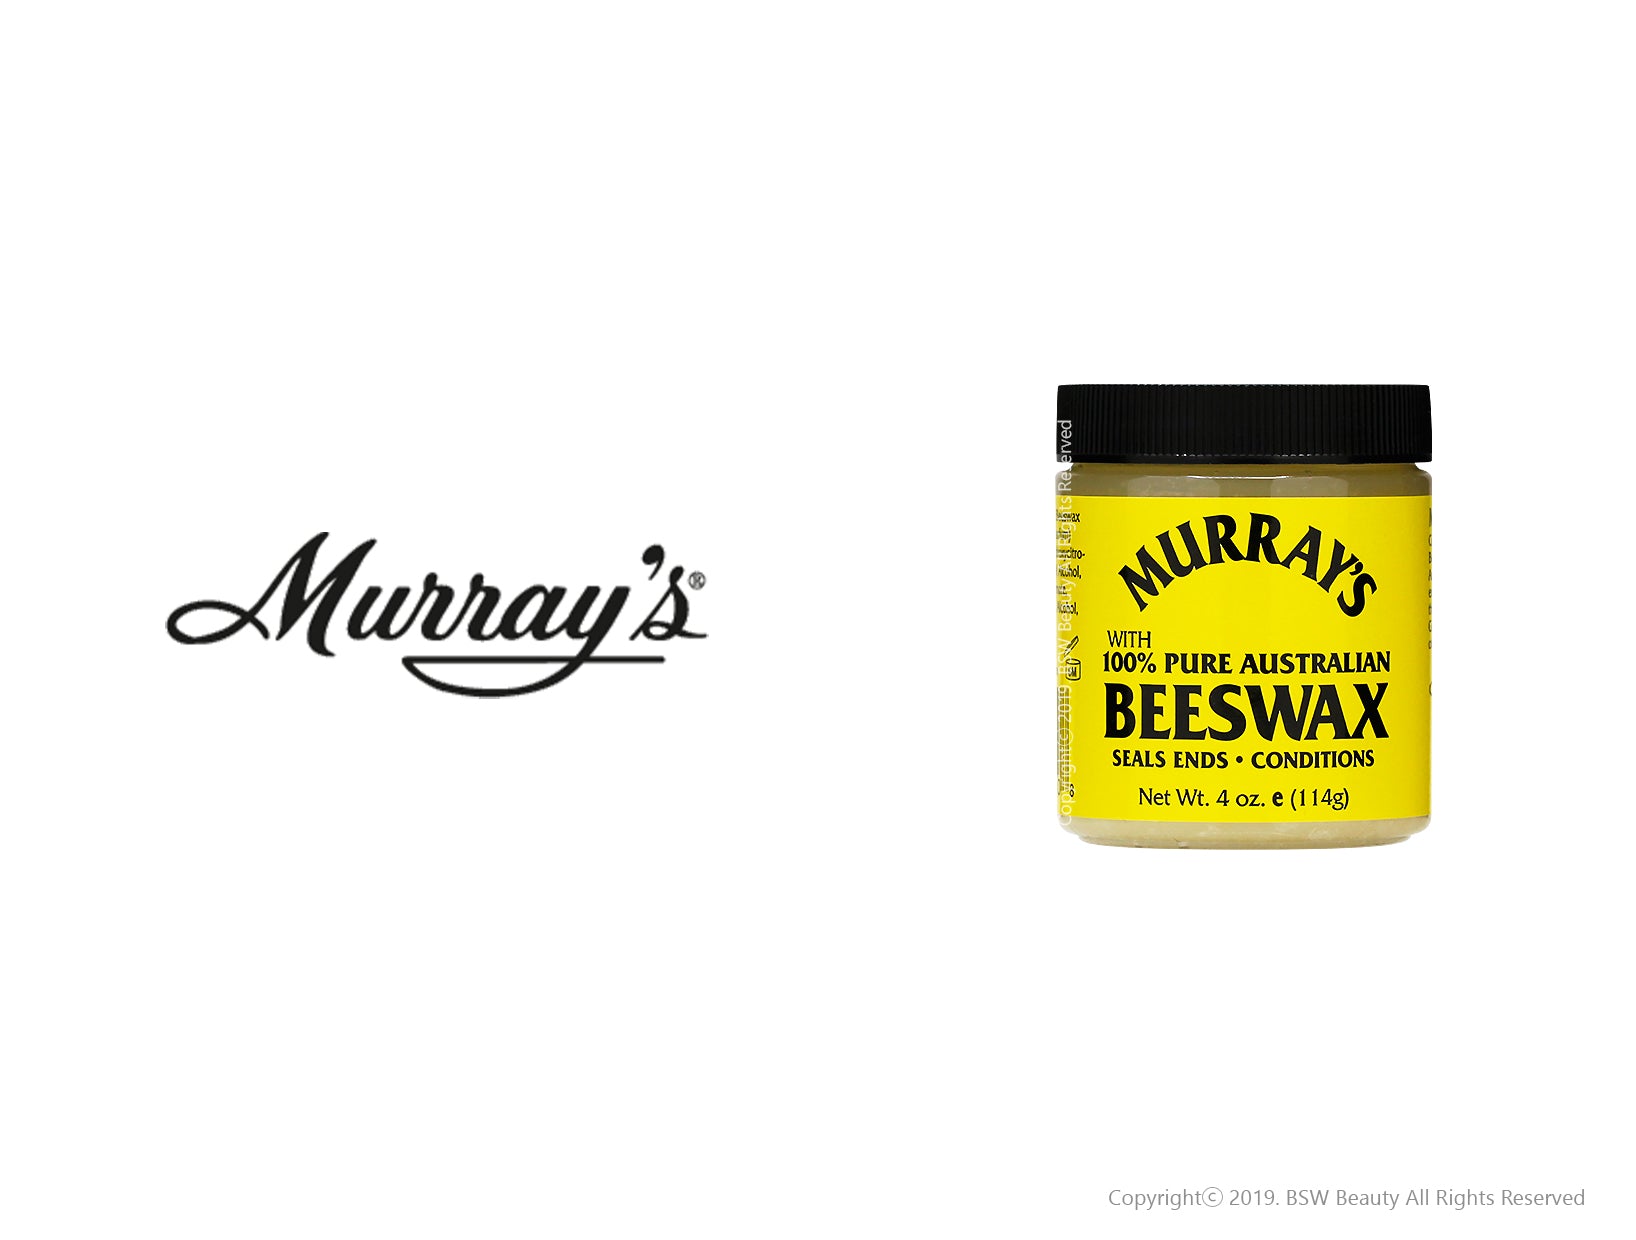  Murray's Edgewax Extreme Hold 4 OZ [2 PACK] : Beauty